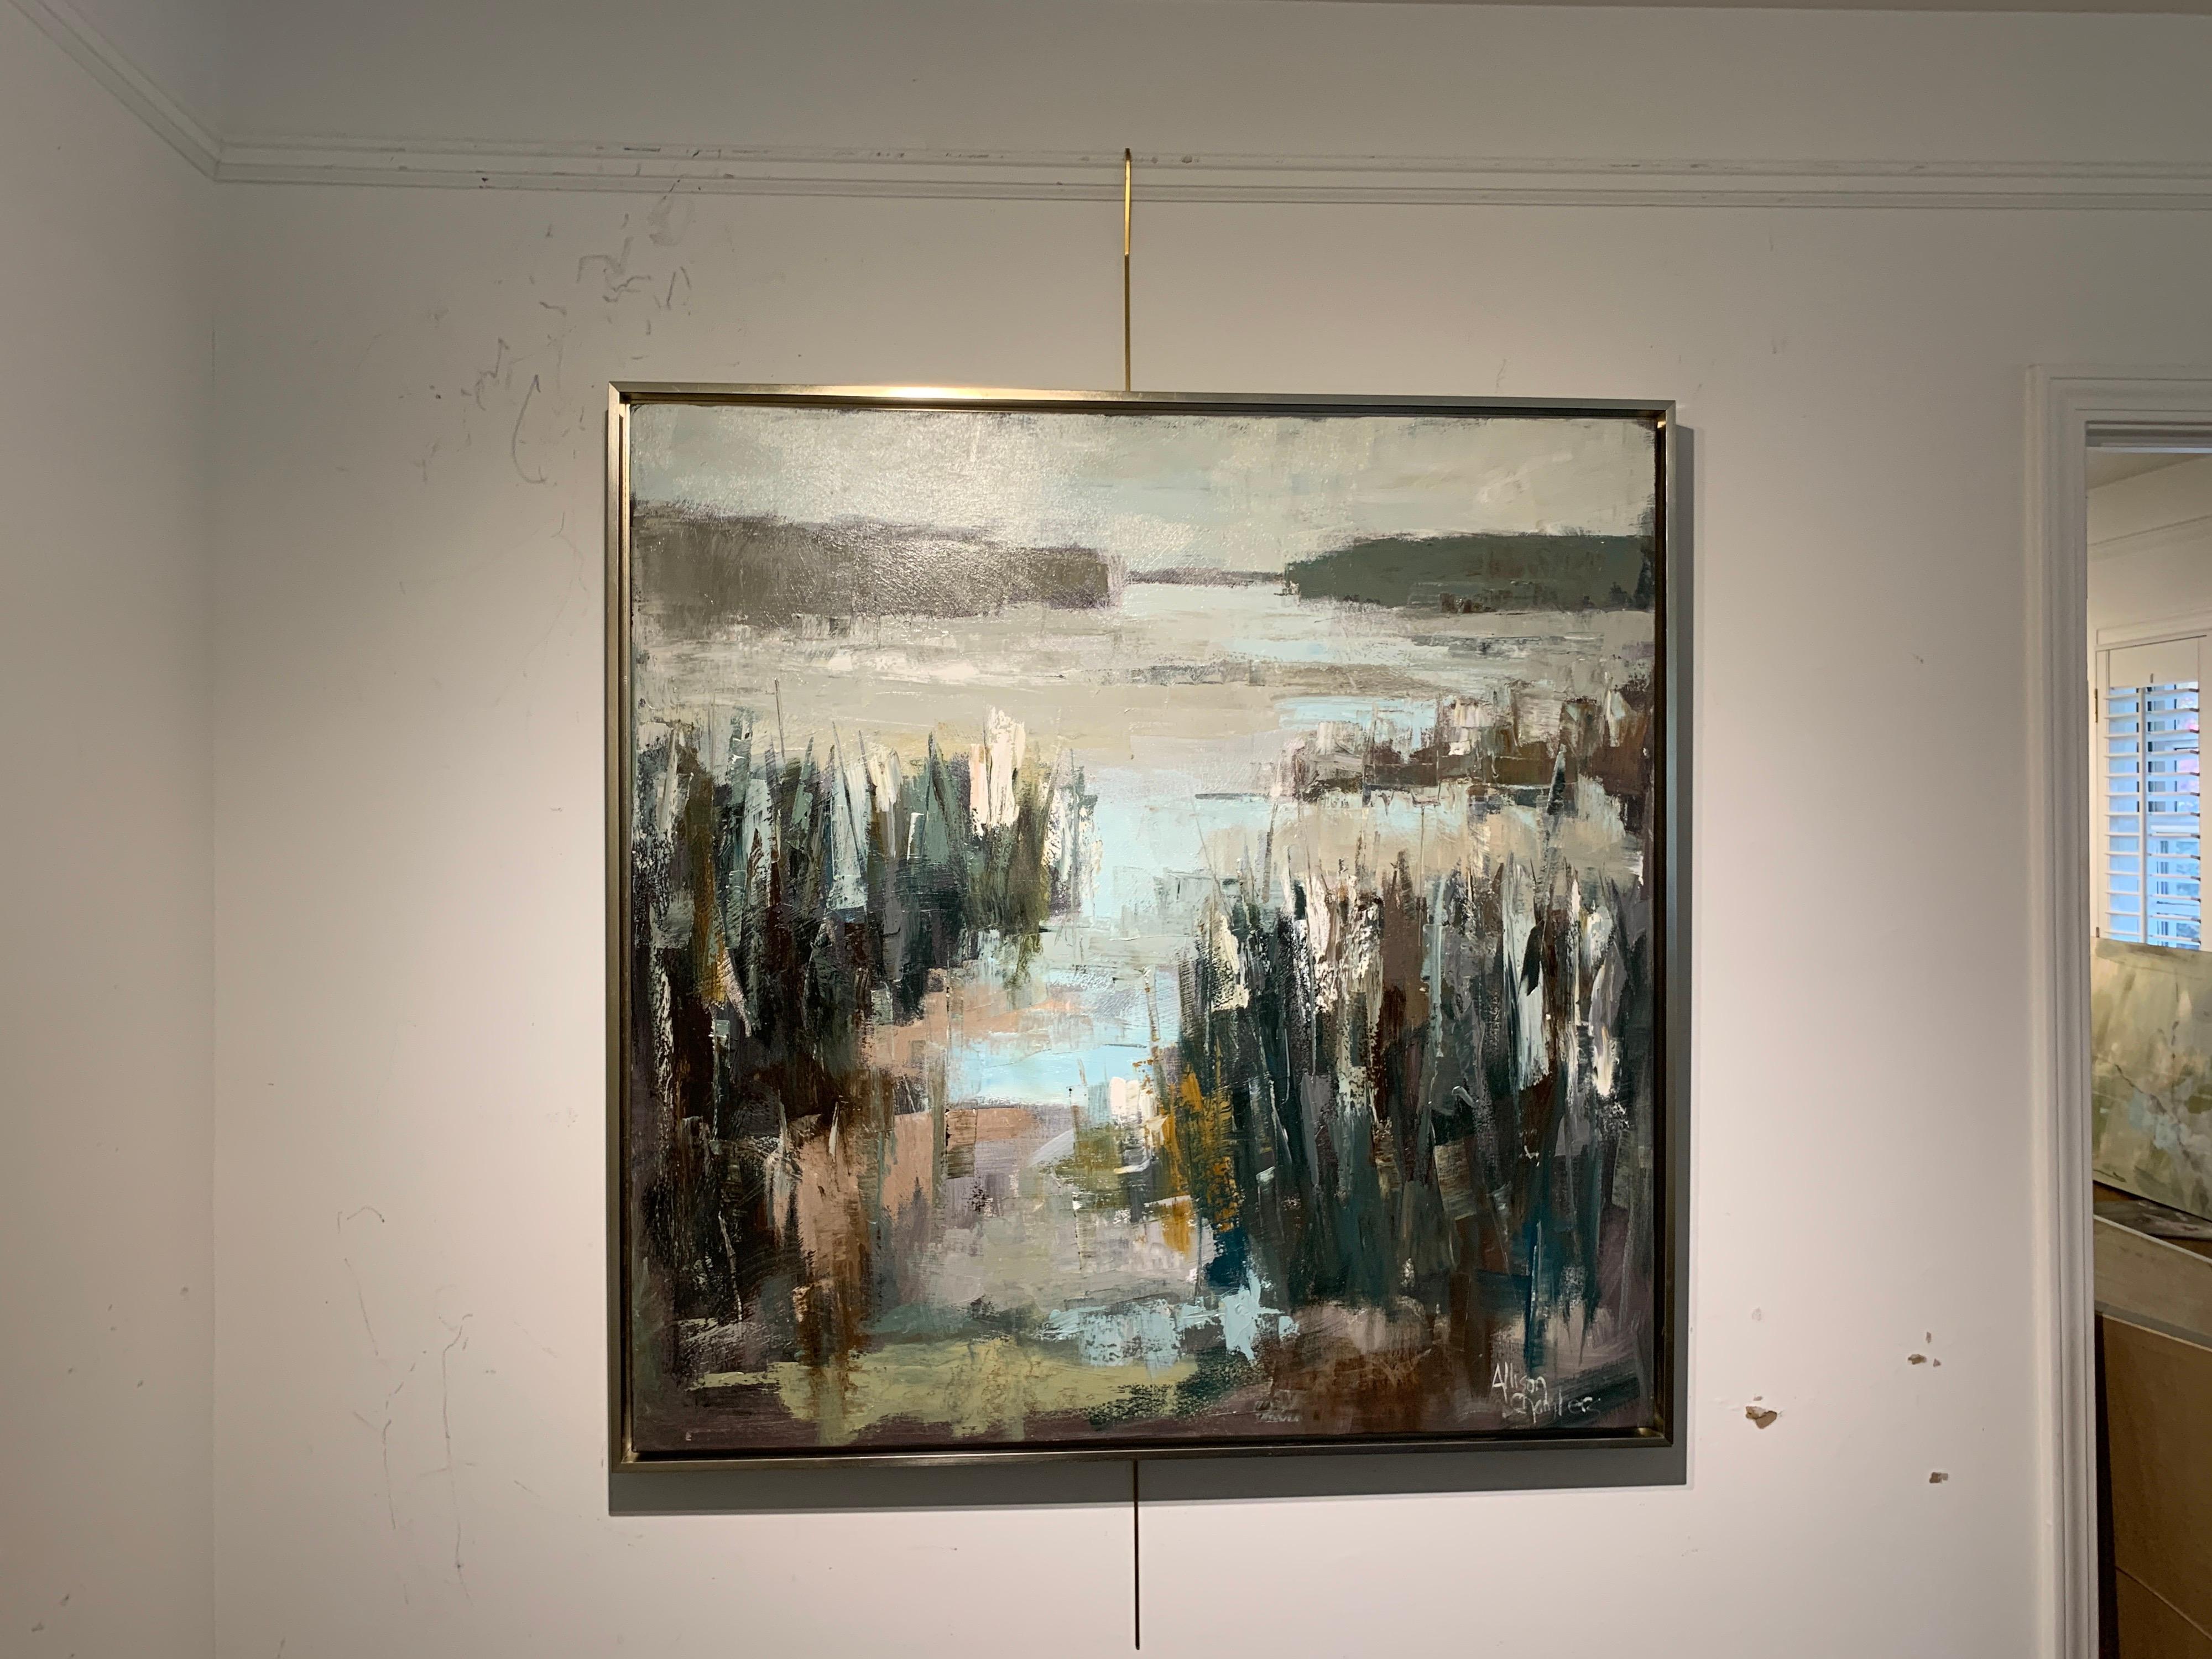 'Everything is All Right' is a framed landscape oil on canvas painting of medium size, created by American artist Allison Chambers in 2020. Featuring a low country scene in a palette made of a variety of colors such as blue, green, brown, purple and